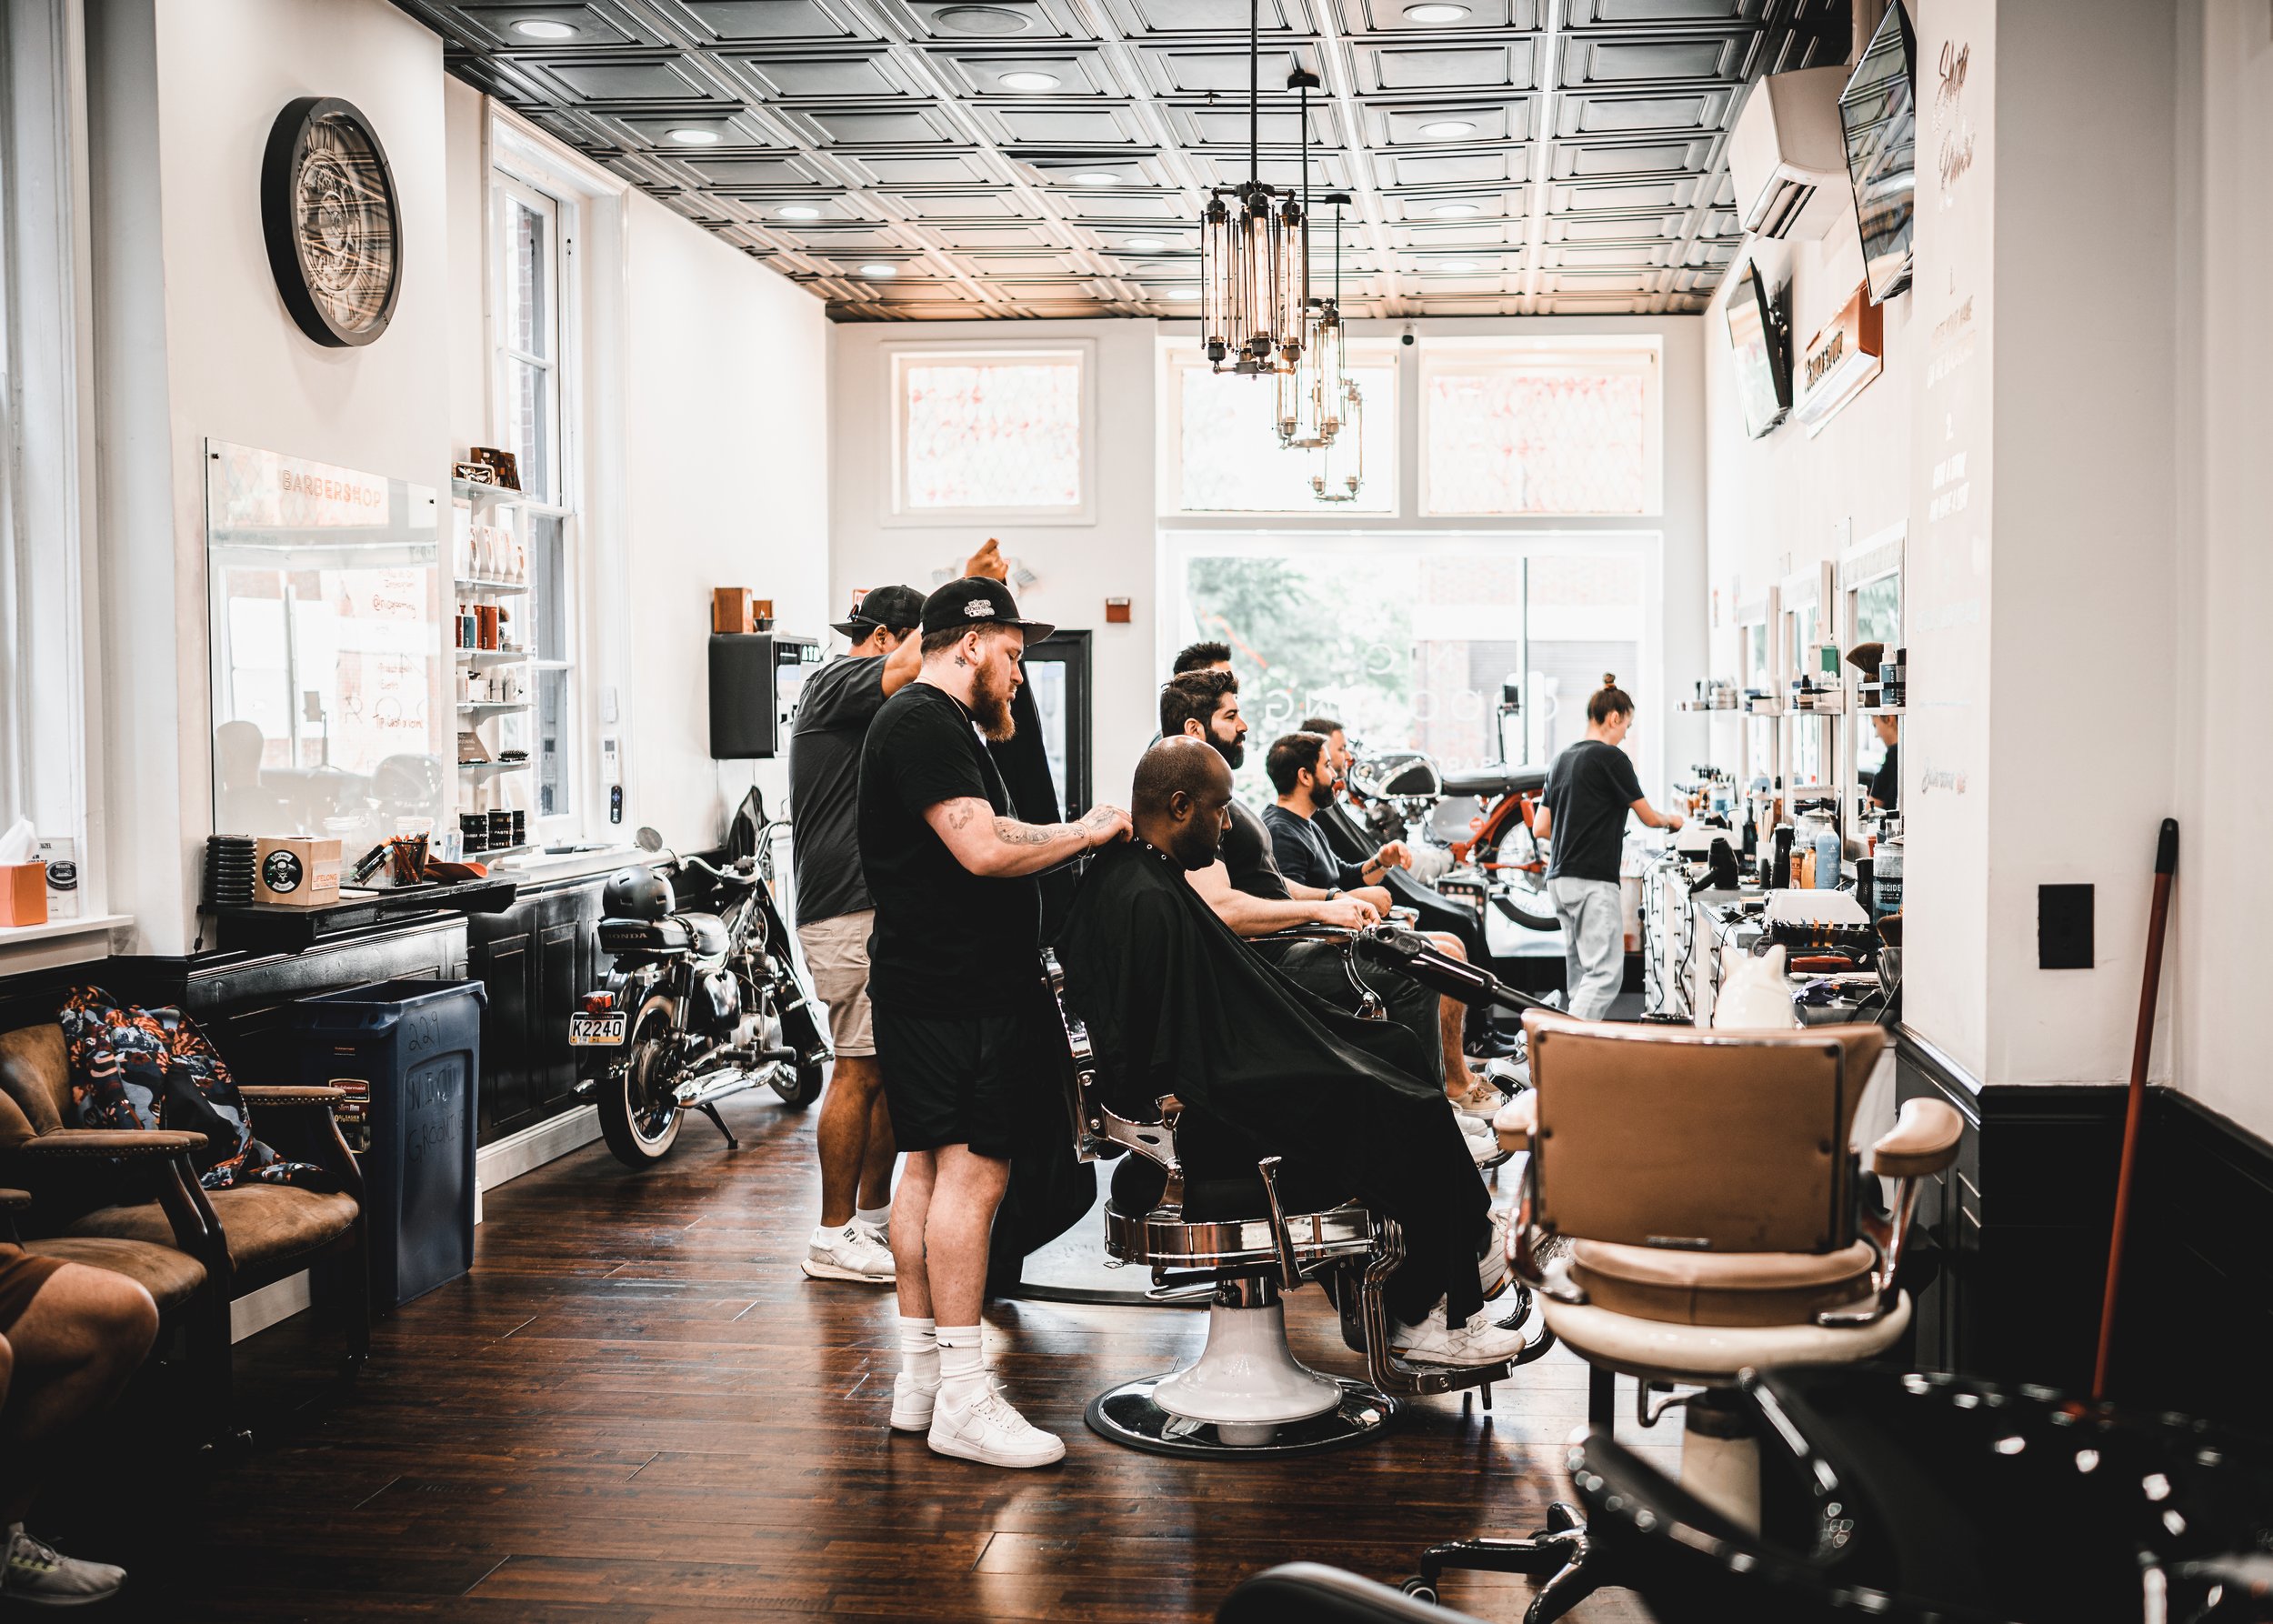 Our barbers are here to make sure you and your wedding party are ready for your big day!